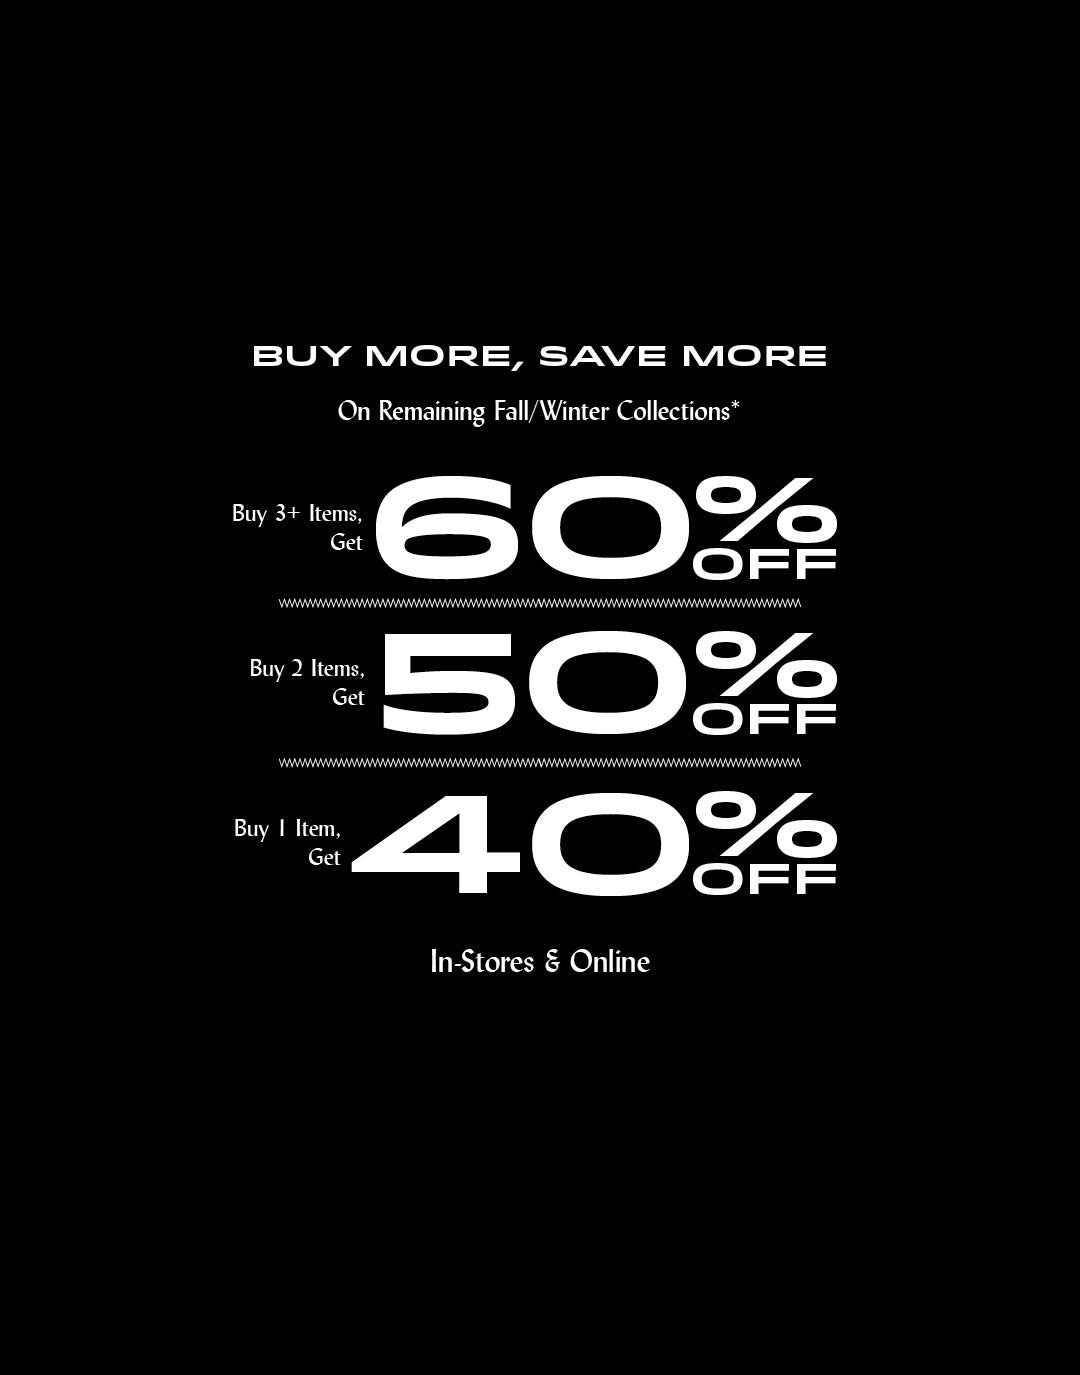 BUY MORE, SAVE MORE - UP TO 60% OFF.